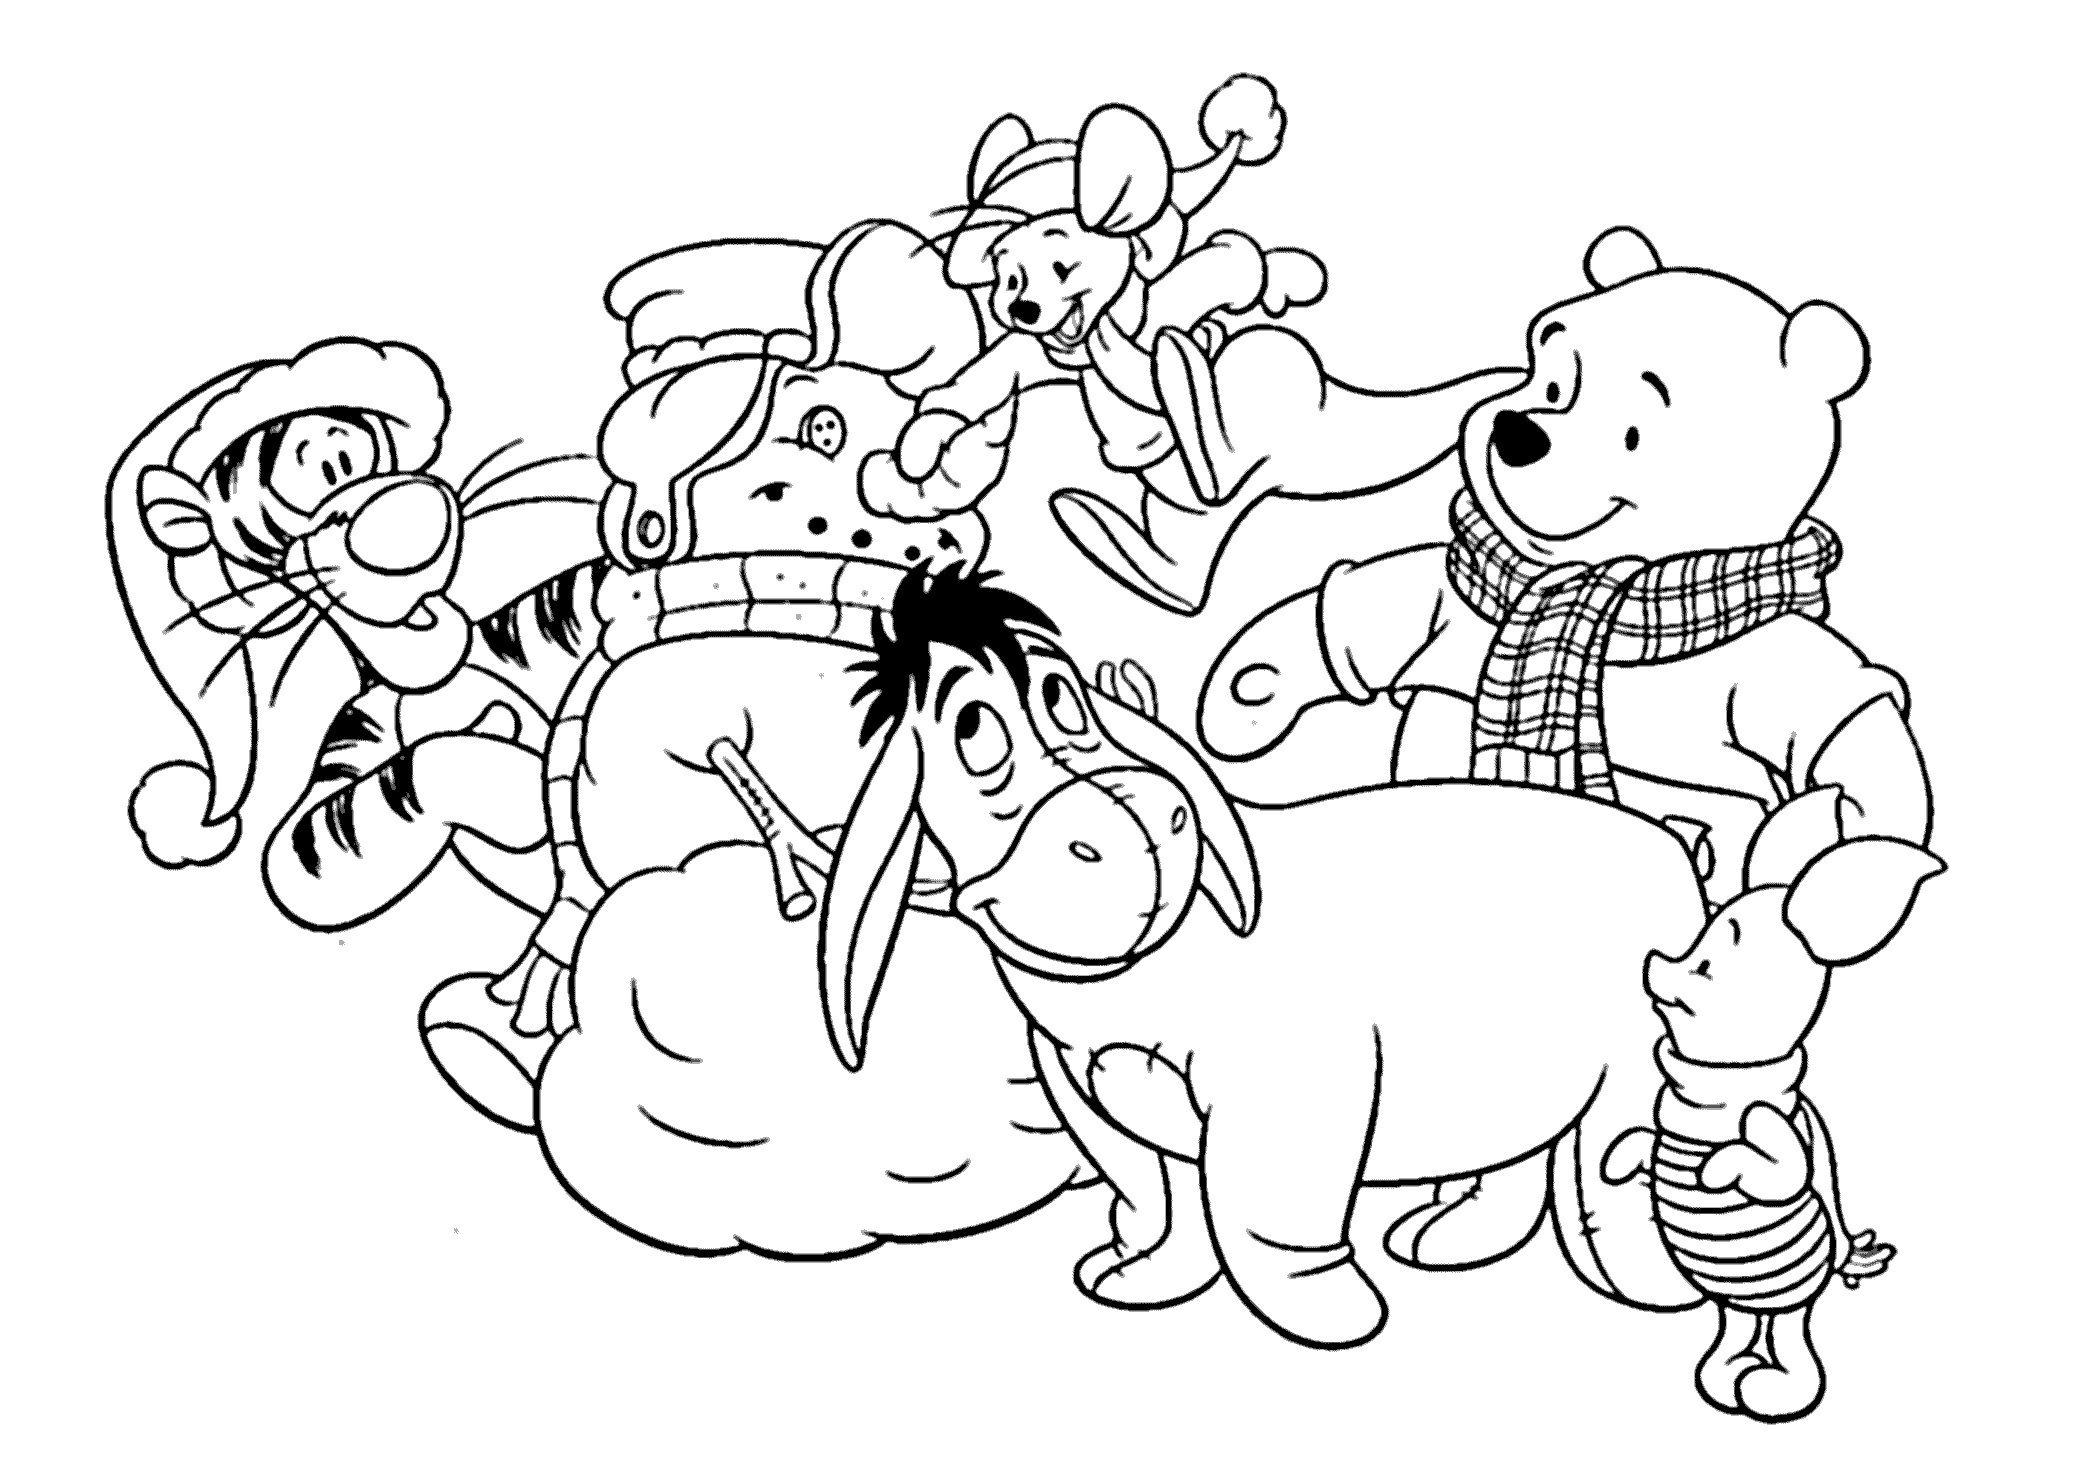 colouring pages about christmas hard christmas coloring pages wallpapers9 christmas about colouring pages 